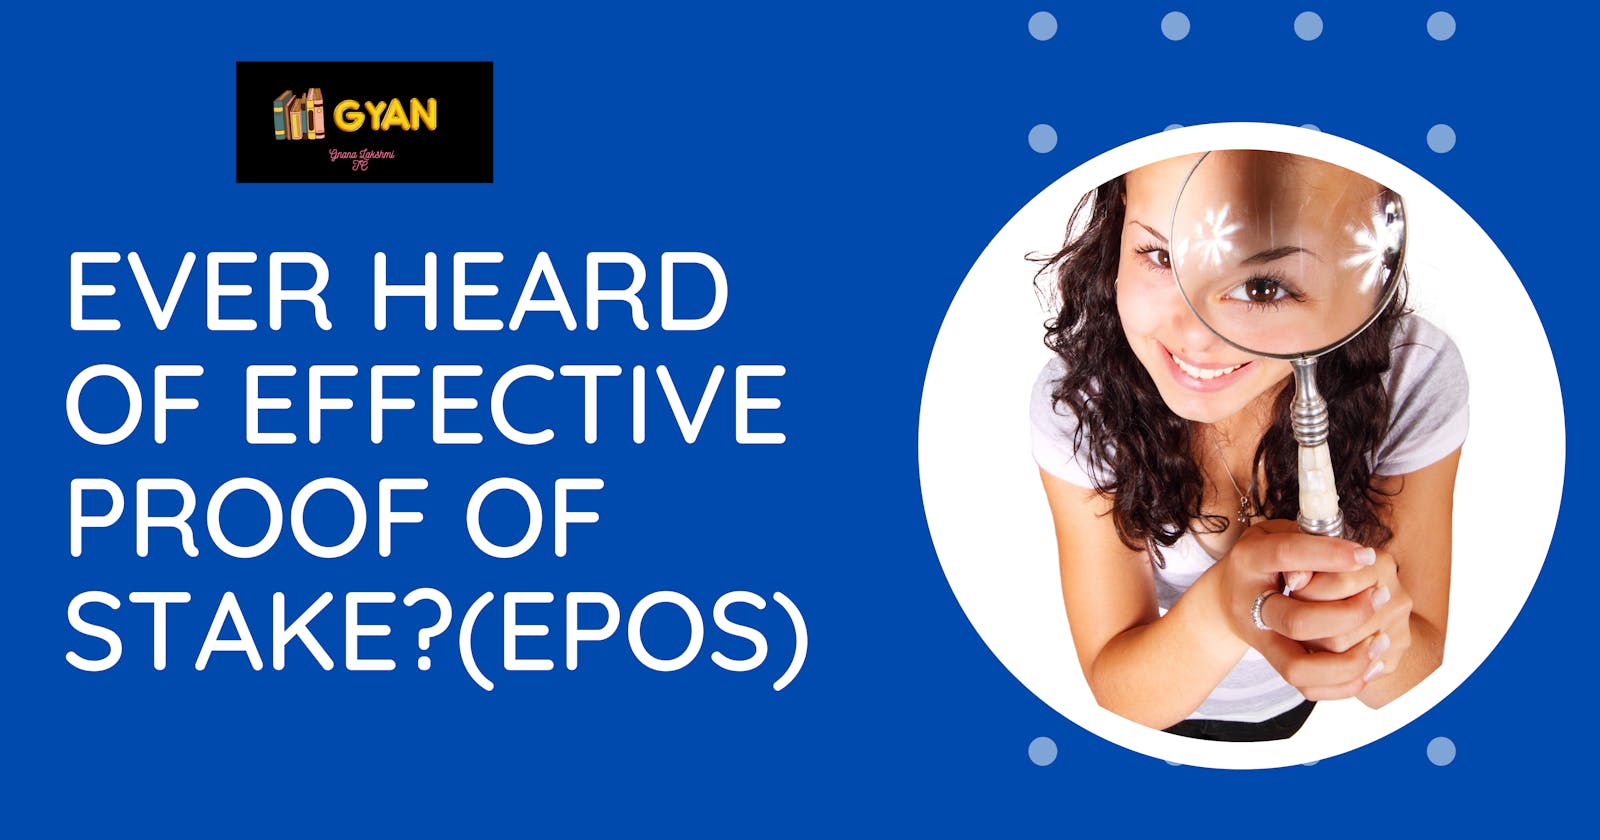 Ever heard of Effective Proof of Stake(EPoS)?